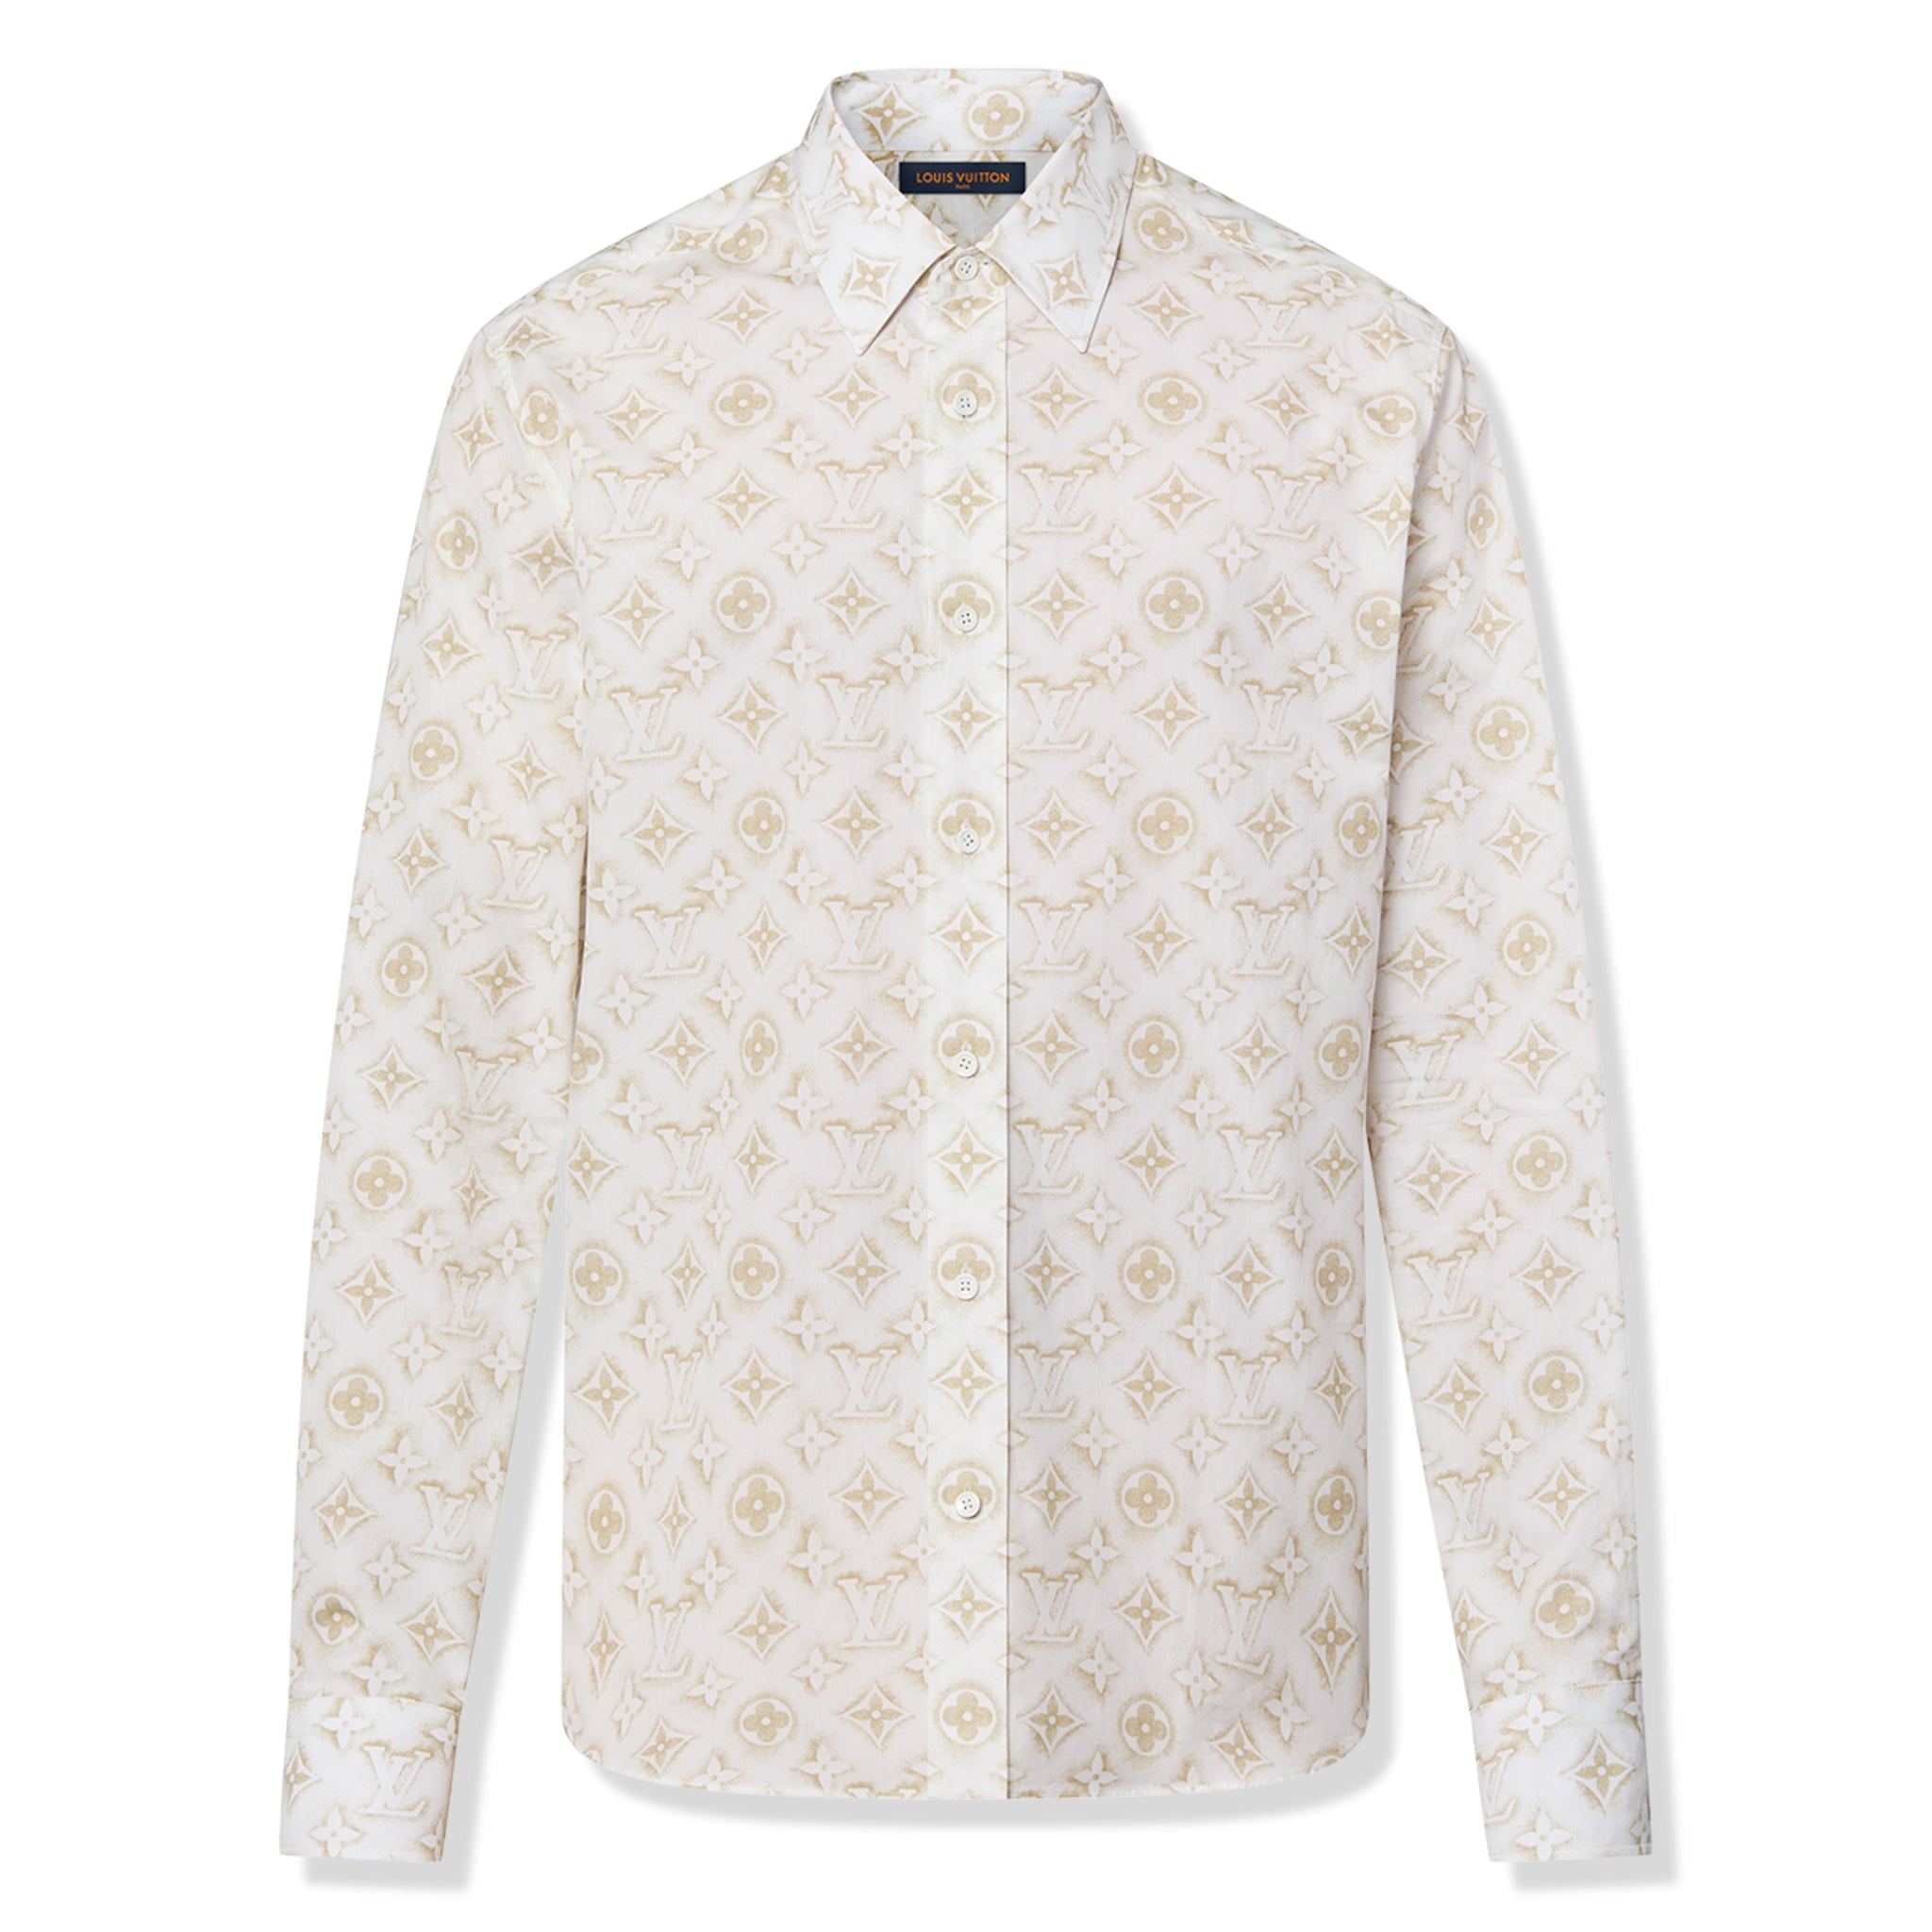 Front view of Louis Vuitton Monogram Long-Sleeved Cotton Shirt White NVPROD4330266V